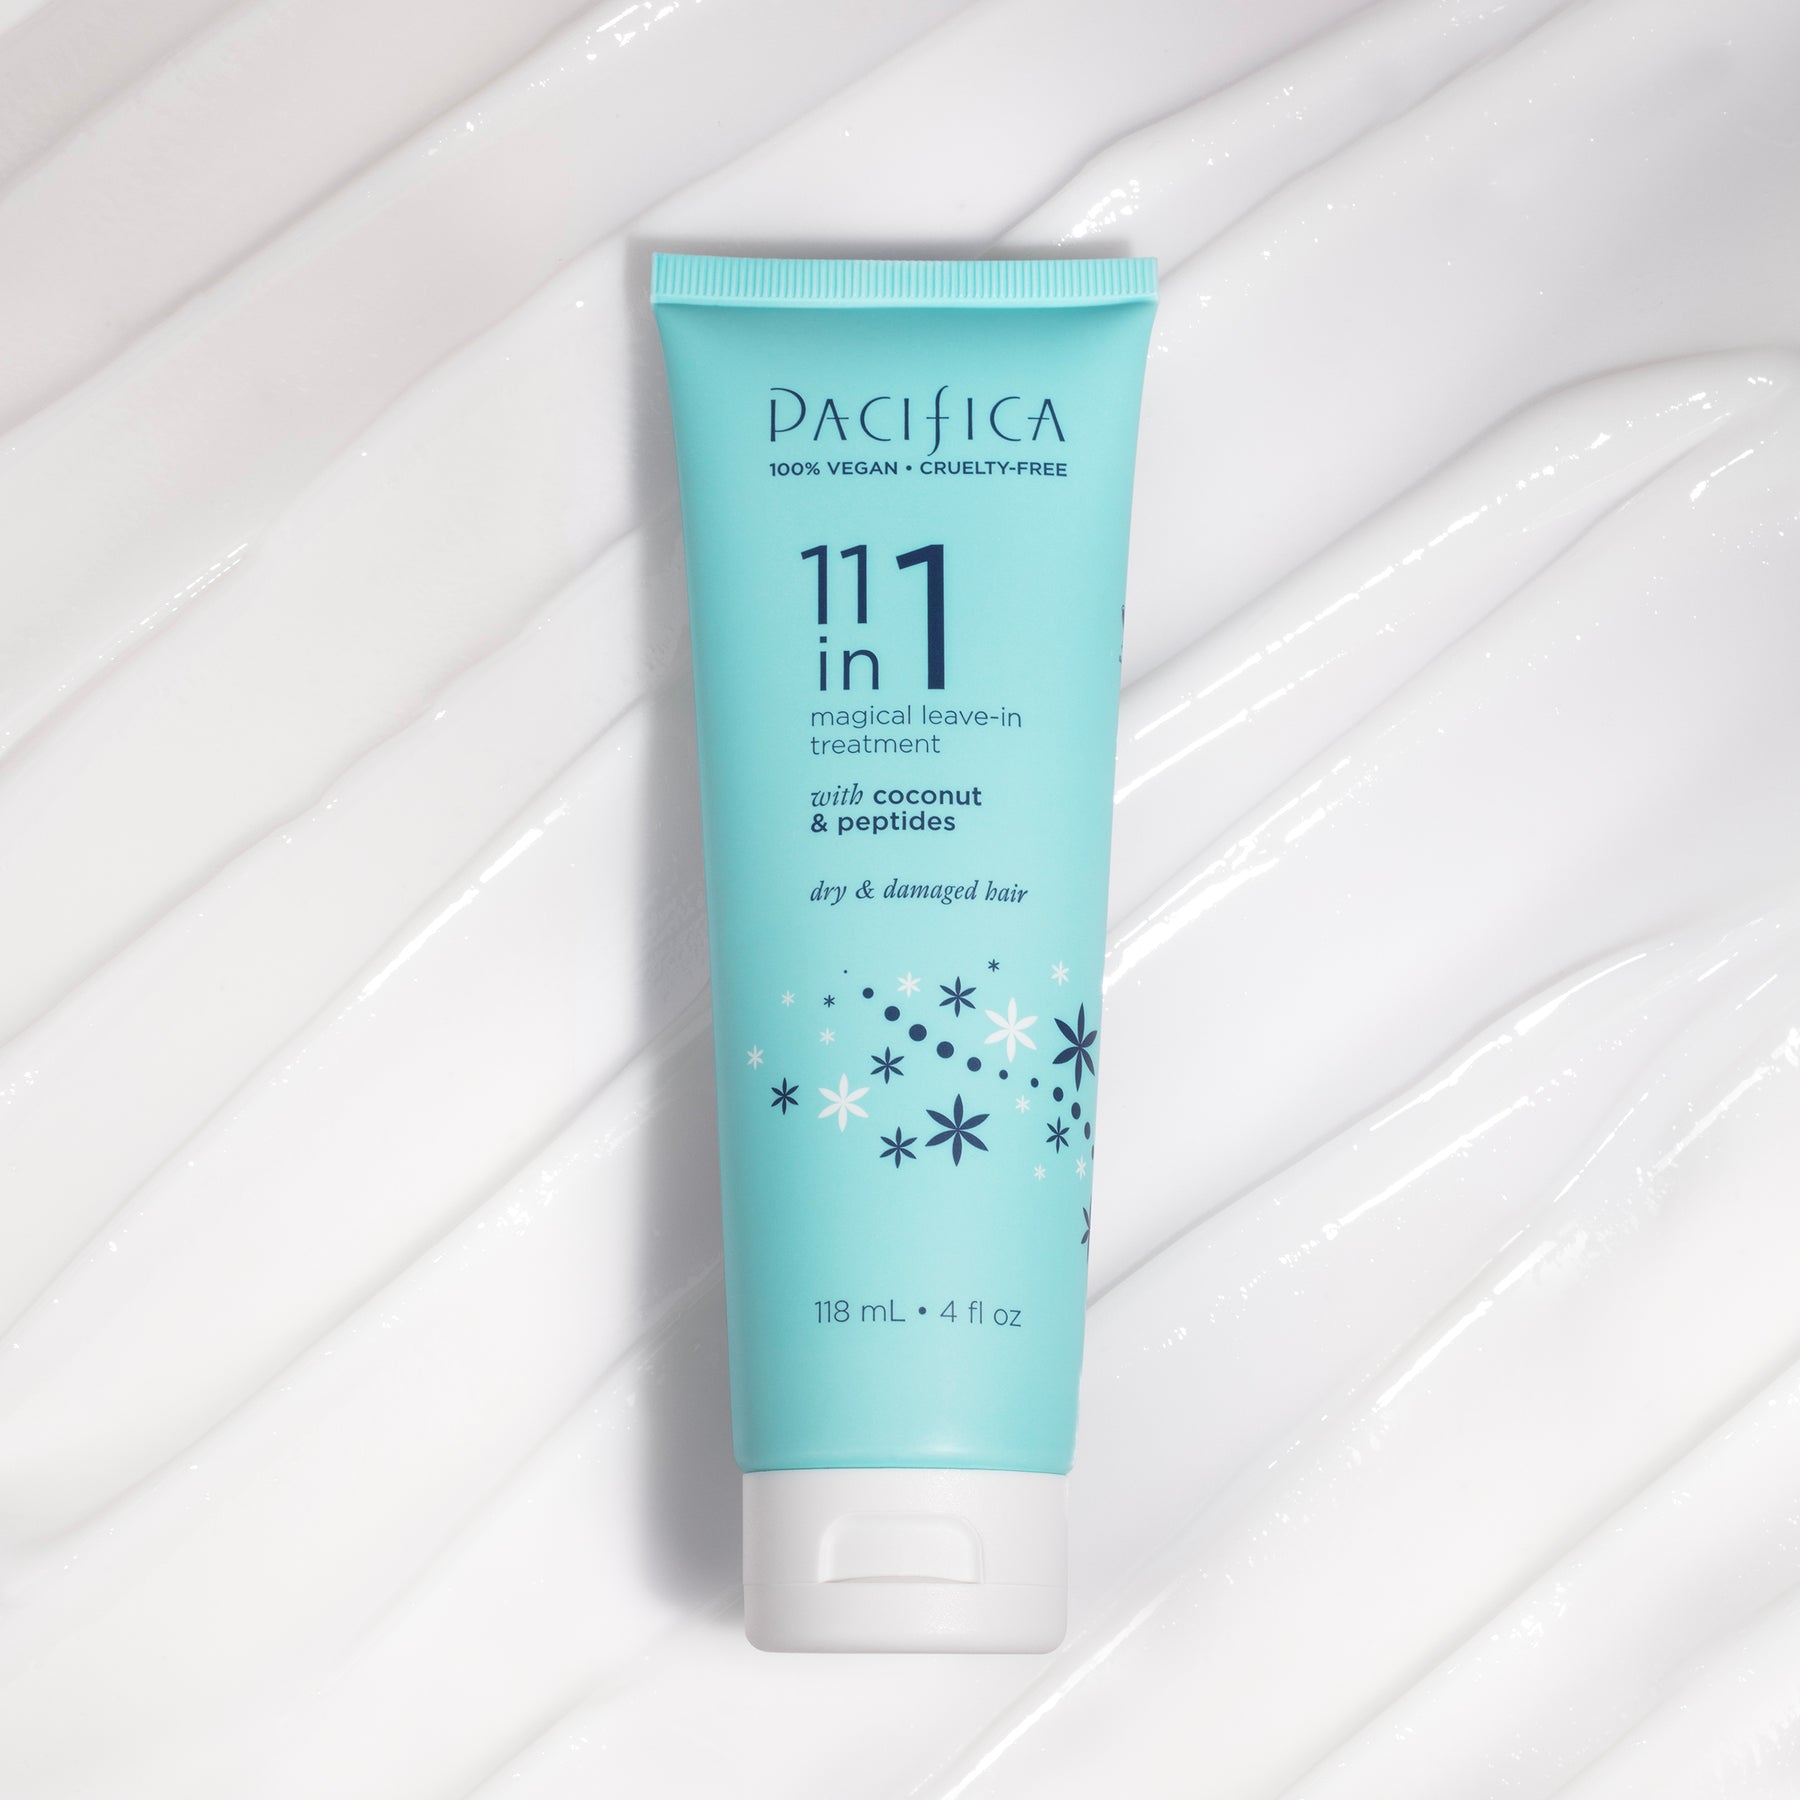 11 in 1 Magical Leave-In Treatment - Haircare - Pacifica Beauty